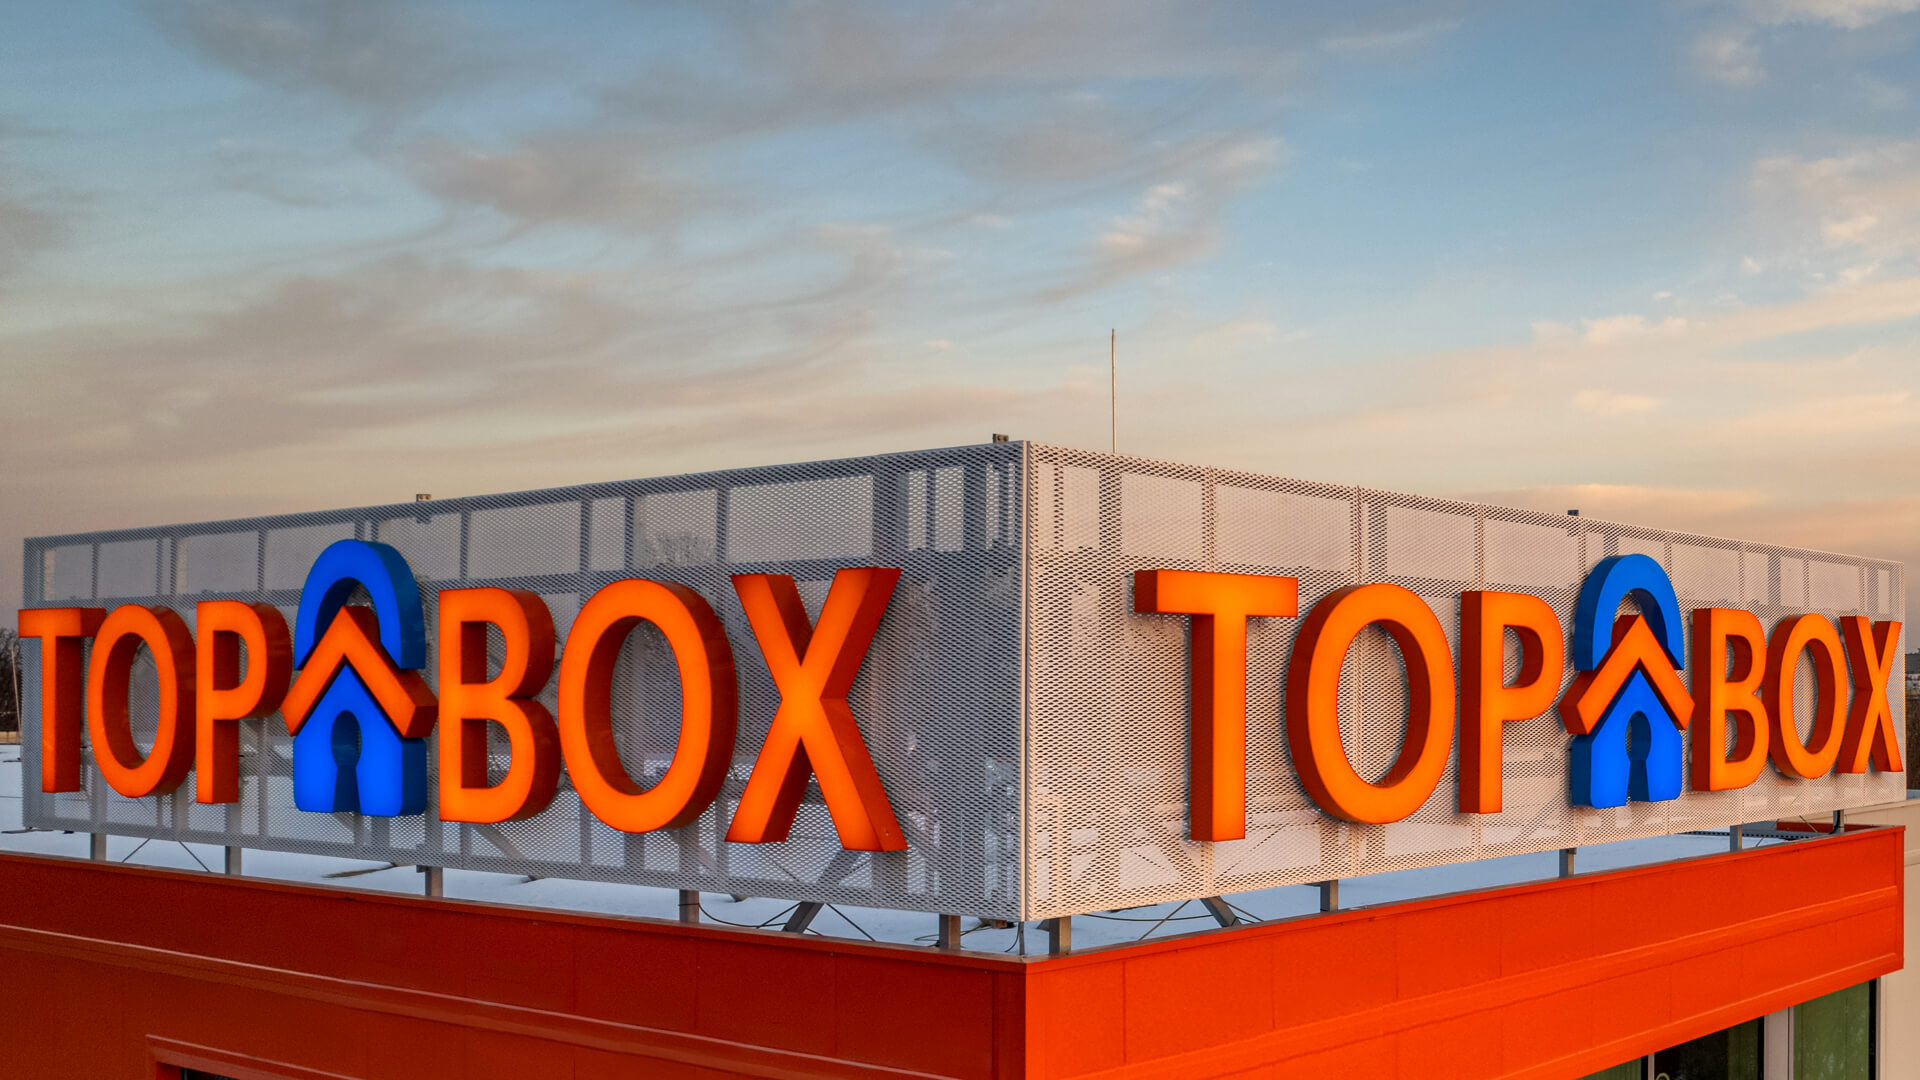 TOP BOX - Letters including logo, front lit, on building